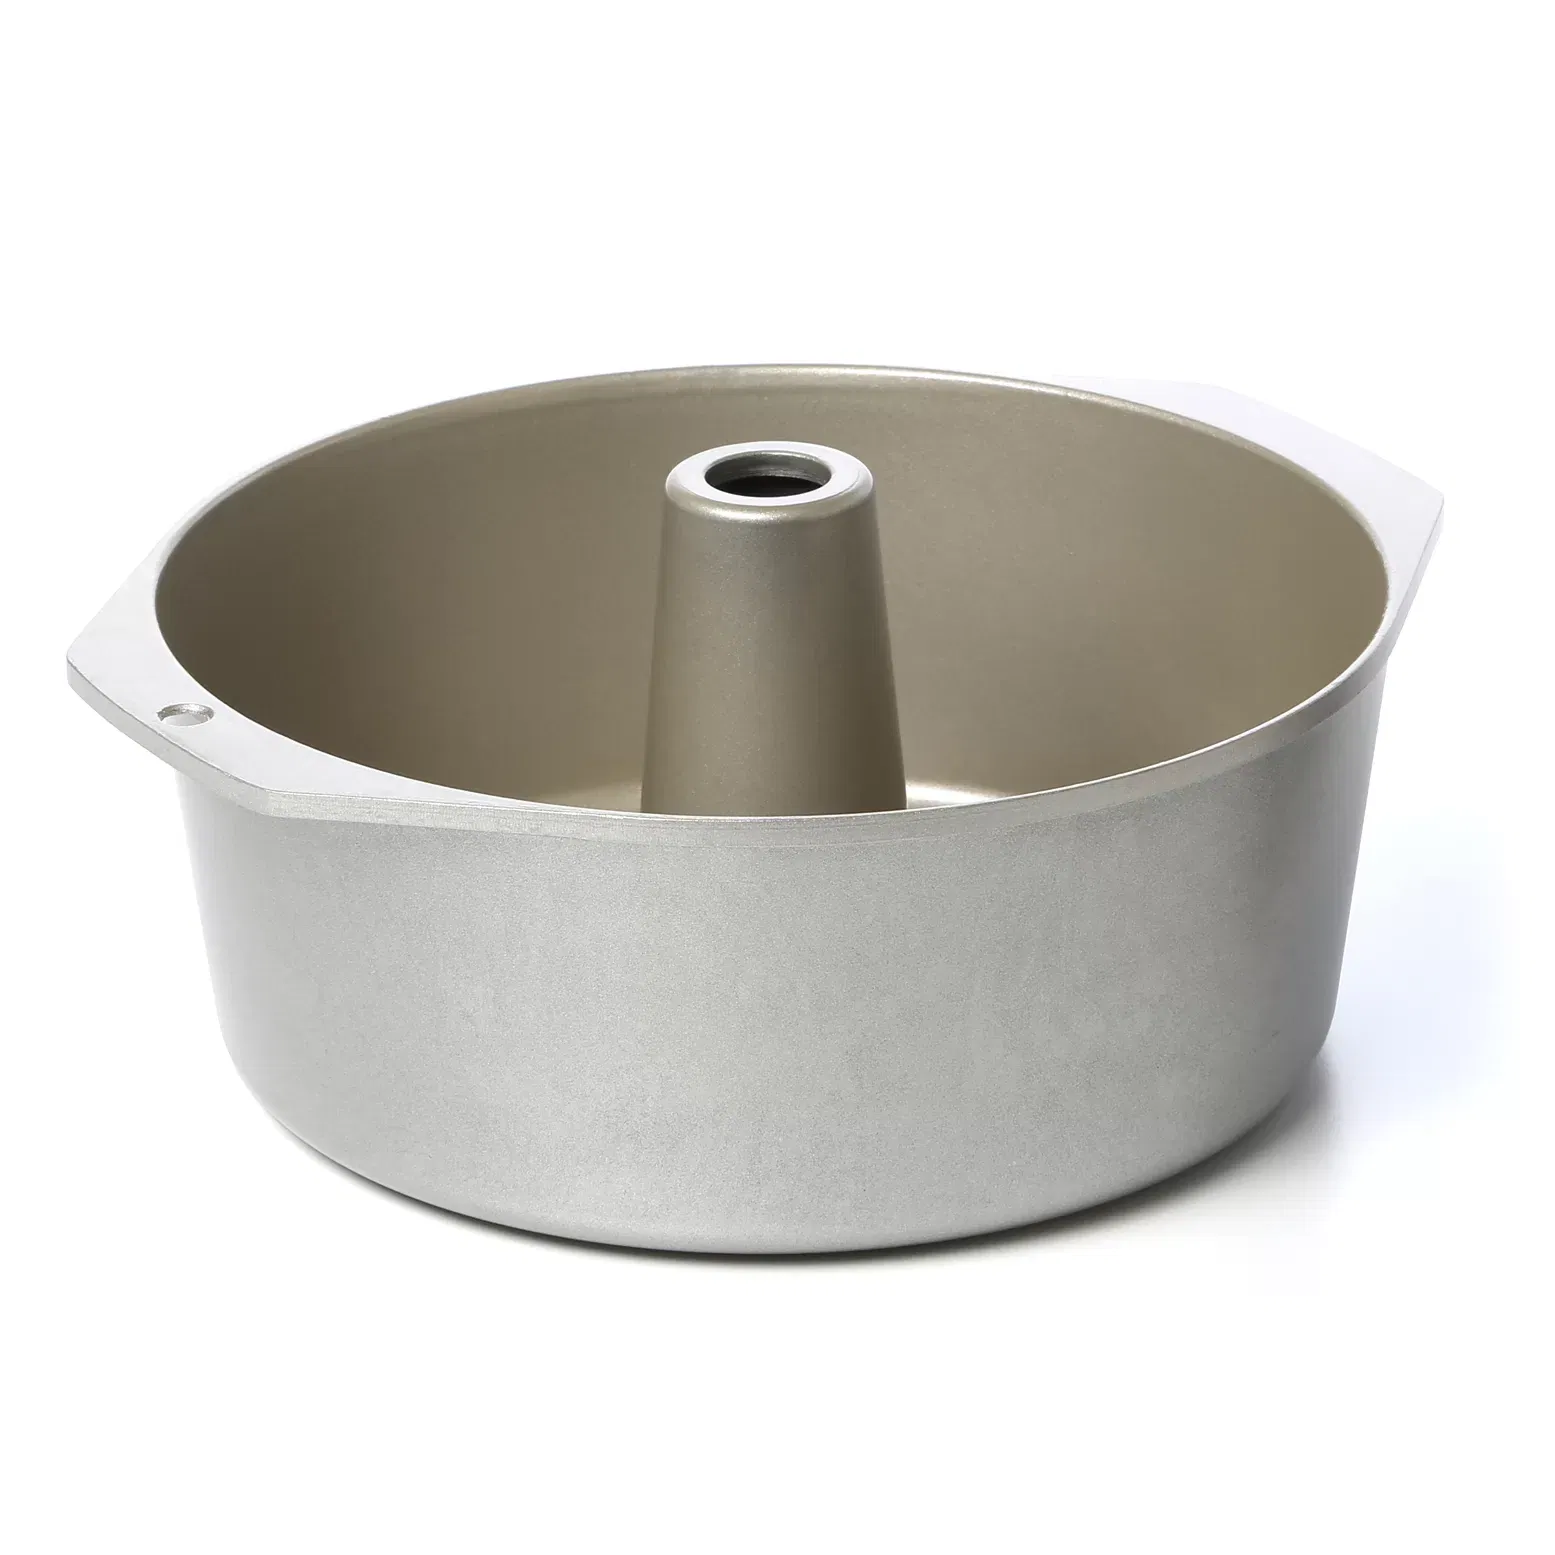 Wayfair: The Bundt Brand Bakeware Platinum 18 Cup Pound Cake/Angel Food Pan  is waiting for you!